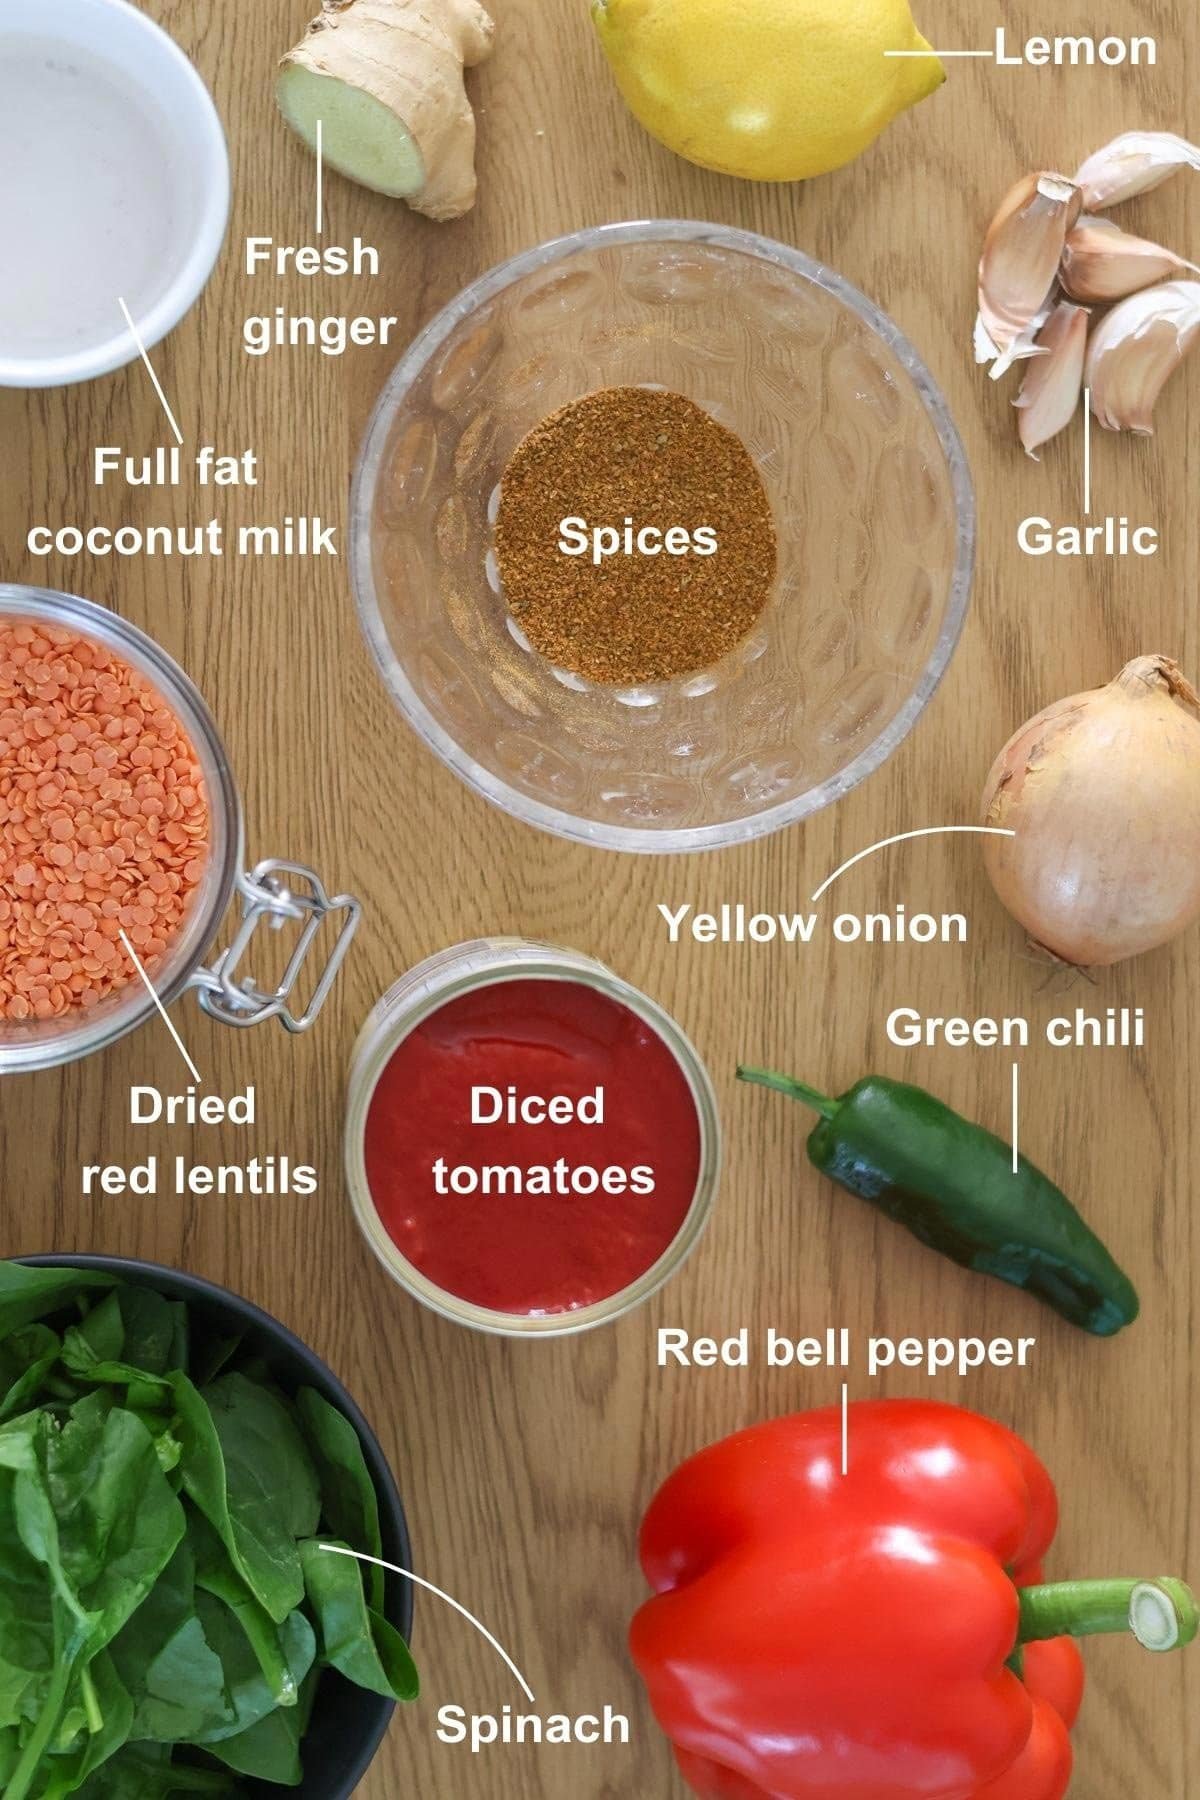 All the ingredients for the recipe on a wooden table.